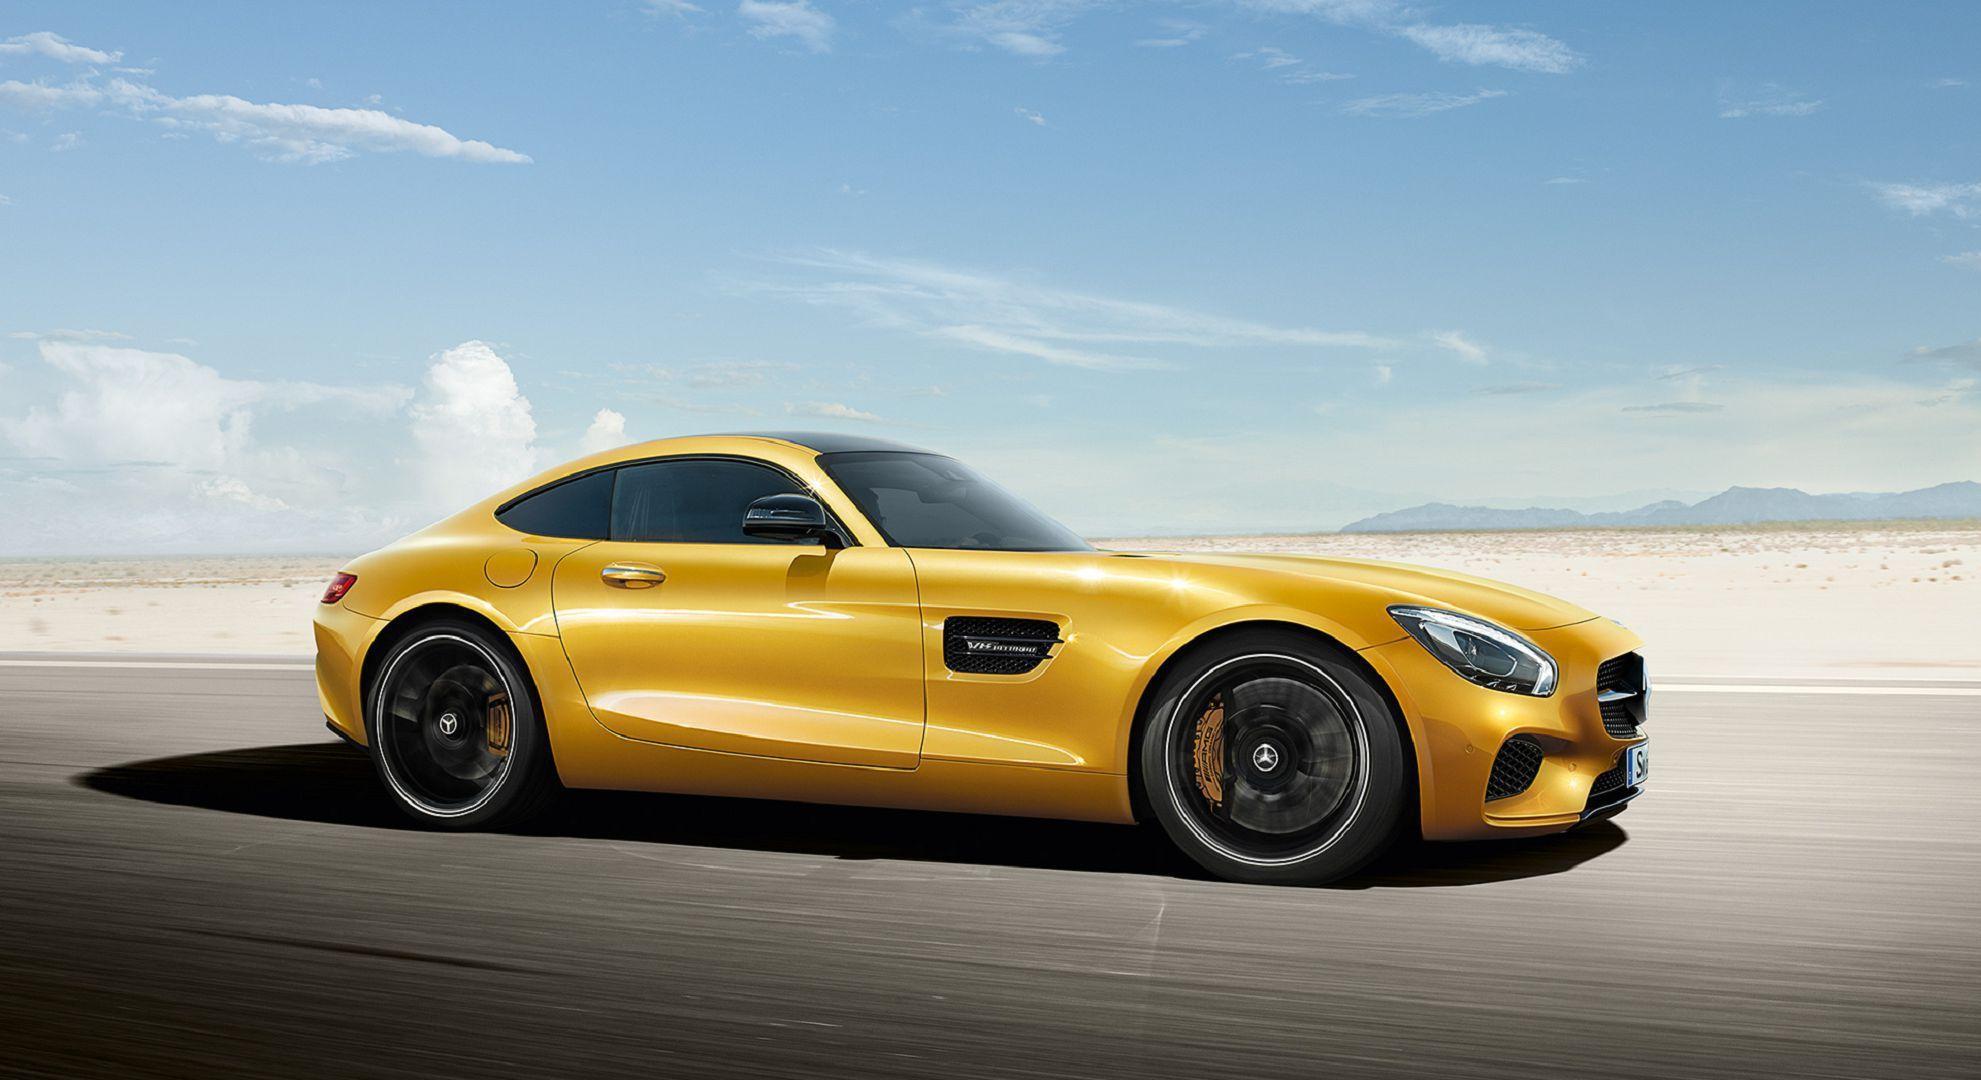 Mercedes AMG GT Wallpaper Image Photo Picture Background